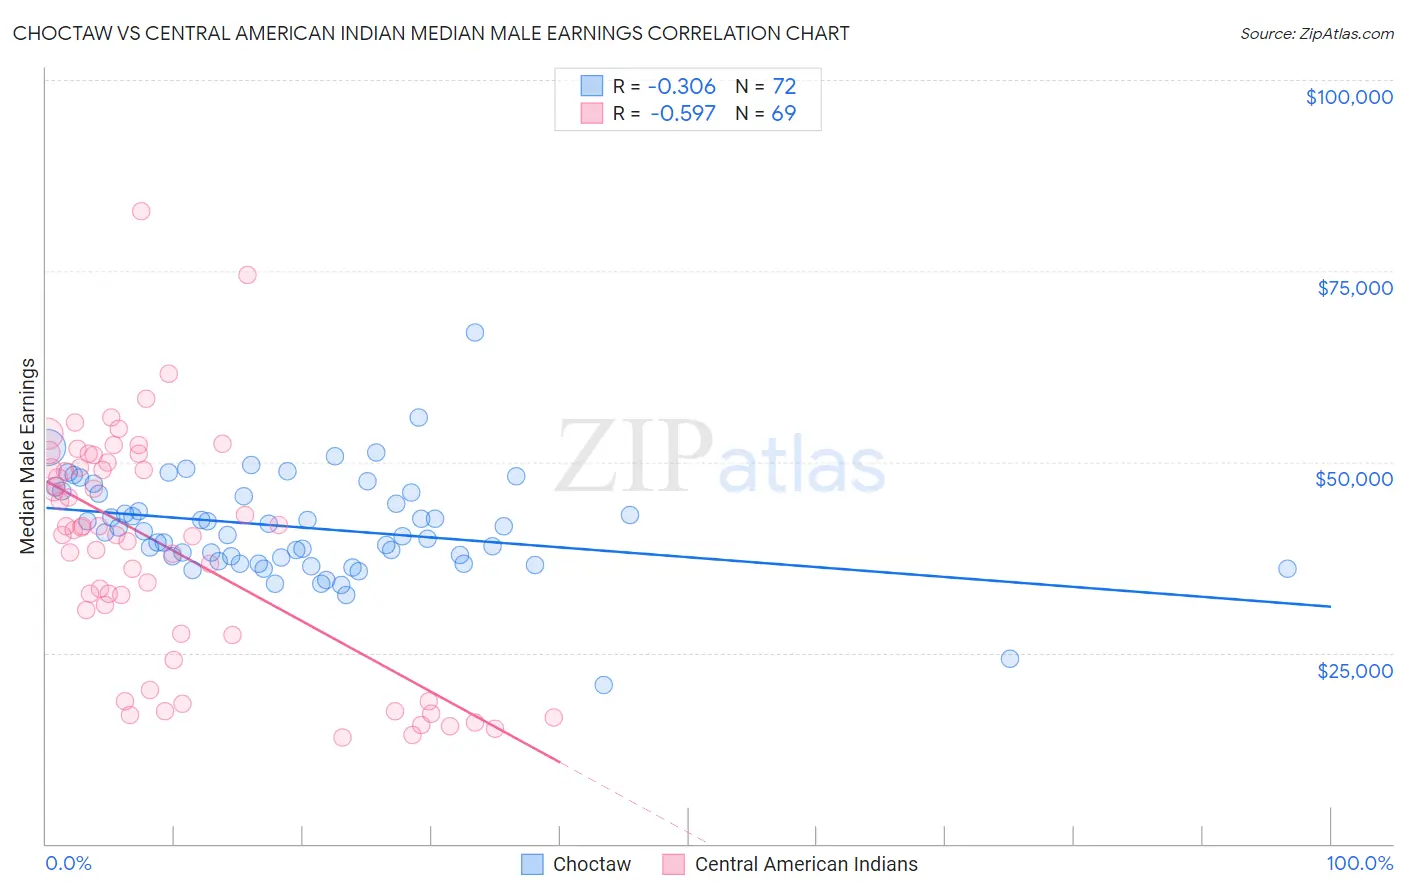 Choctaw vs Central American Indian Median Male Earnings